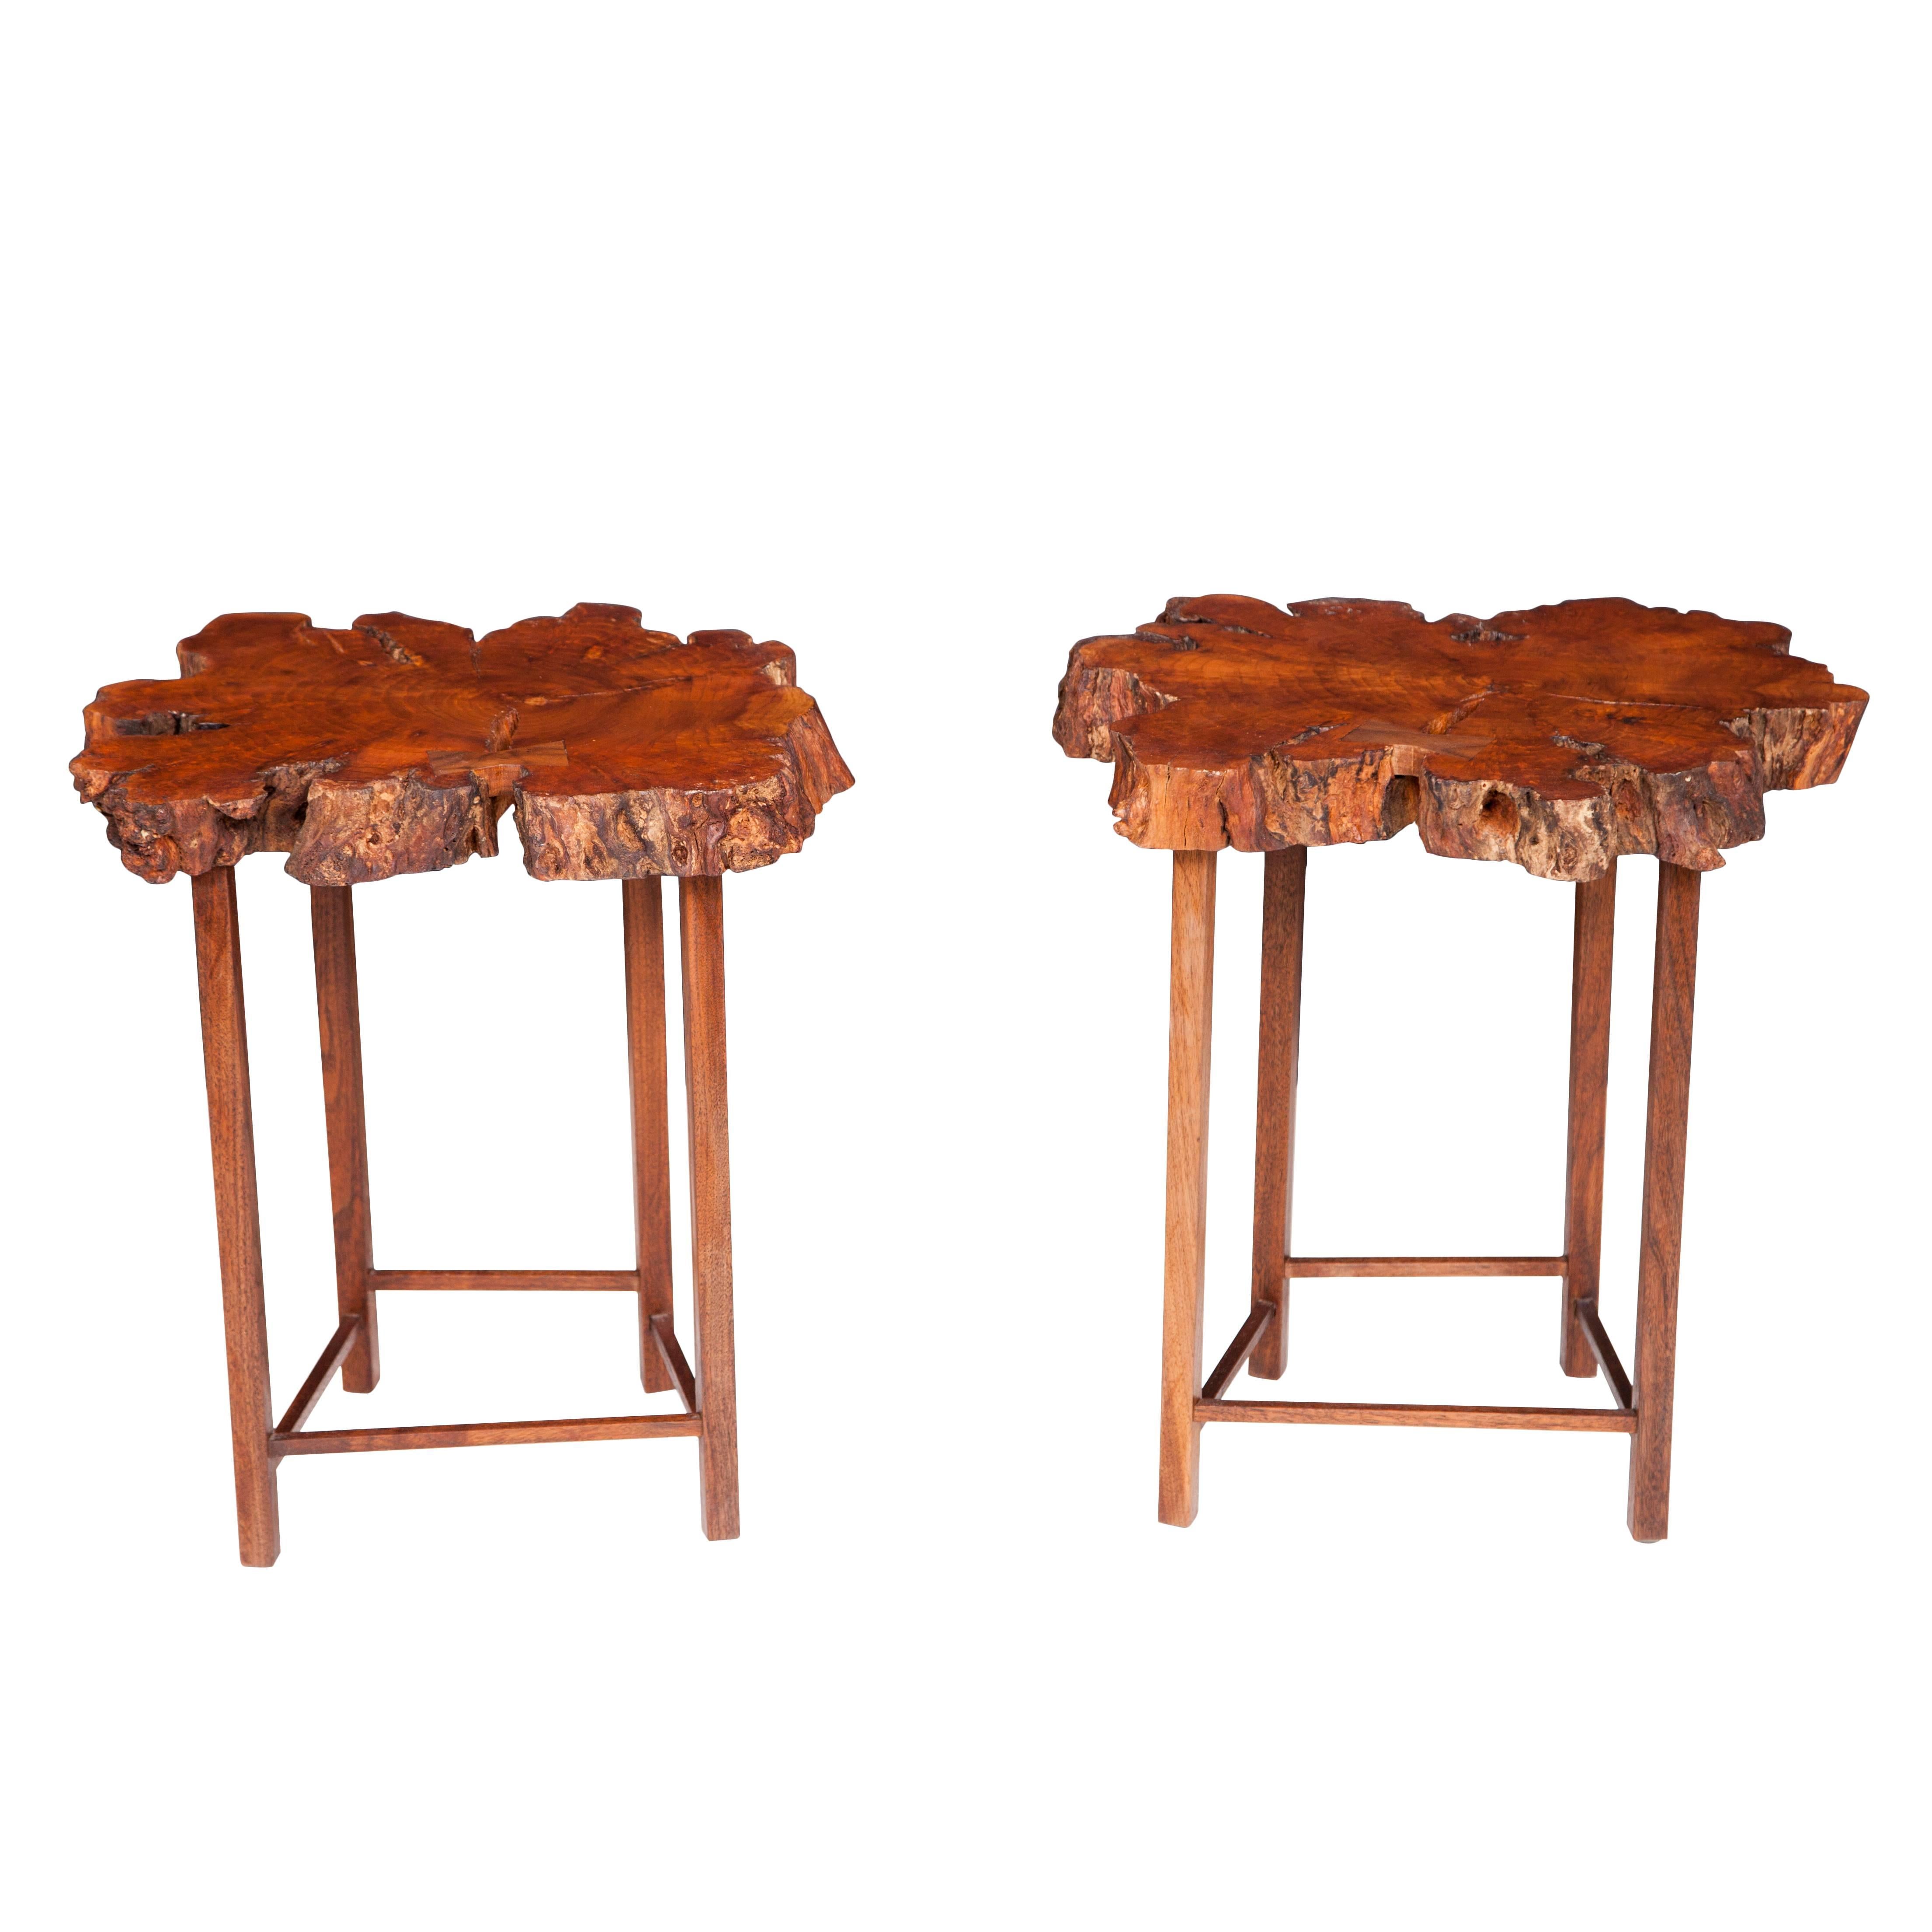 Burl Cherrybomb Tables by Don Howell, circa 2010 For Sale